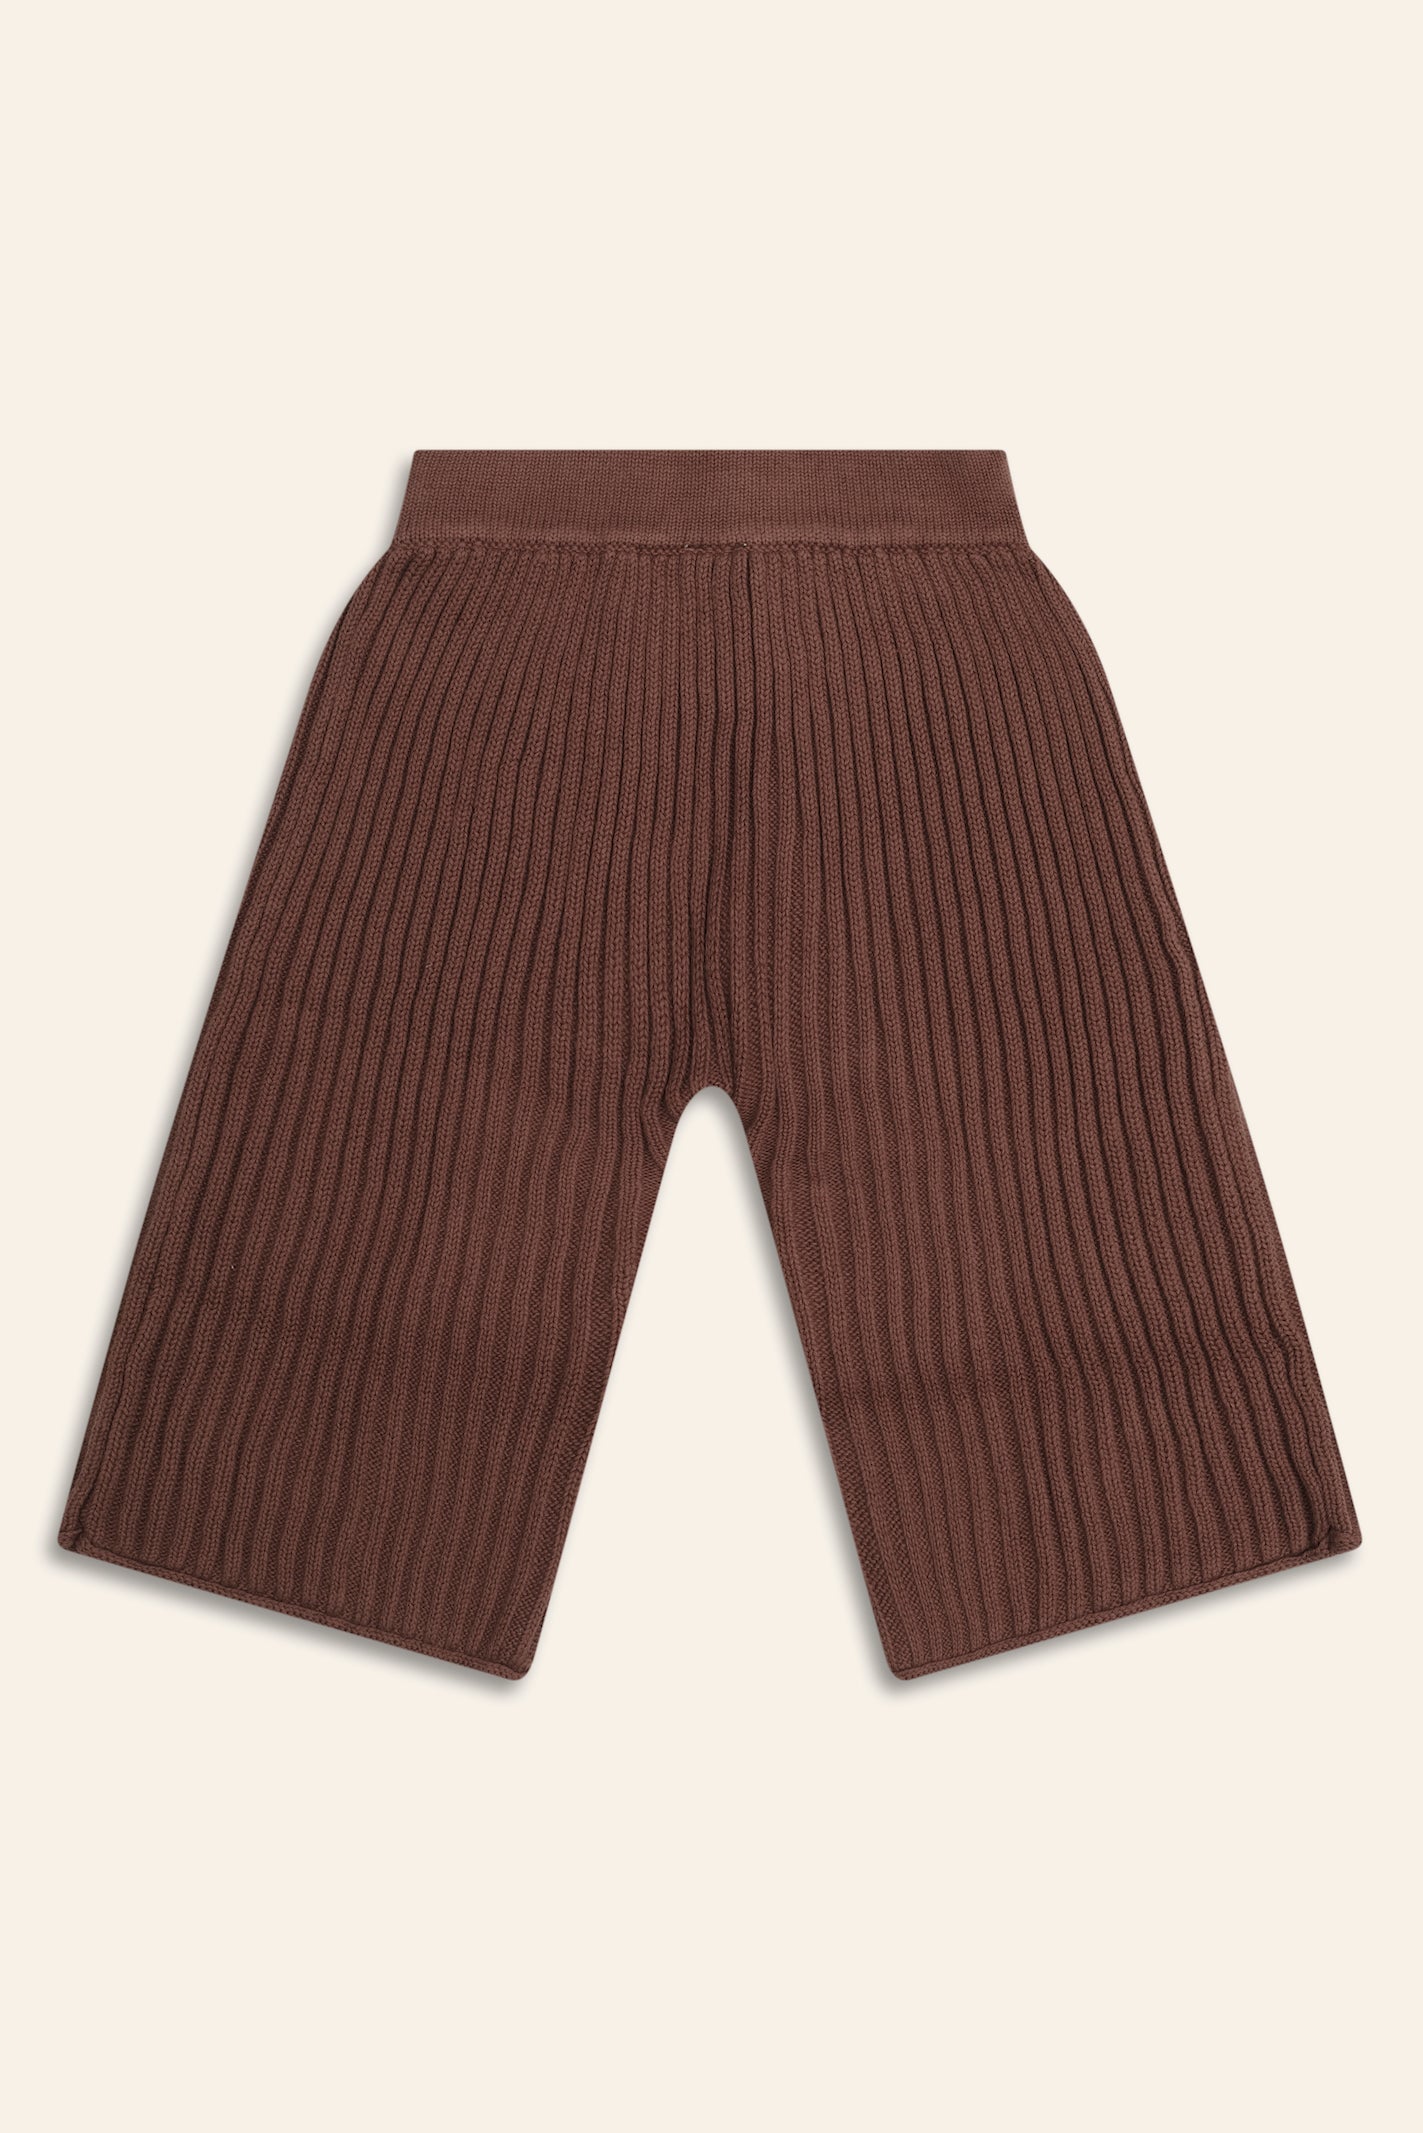 Essential Knit Pants // Cocoa